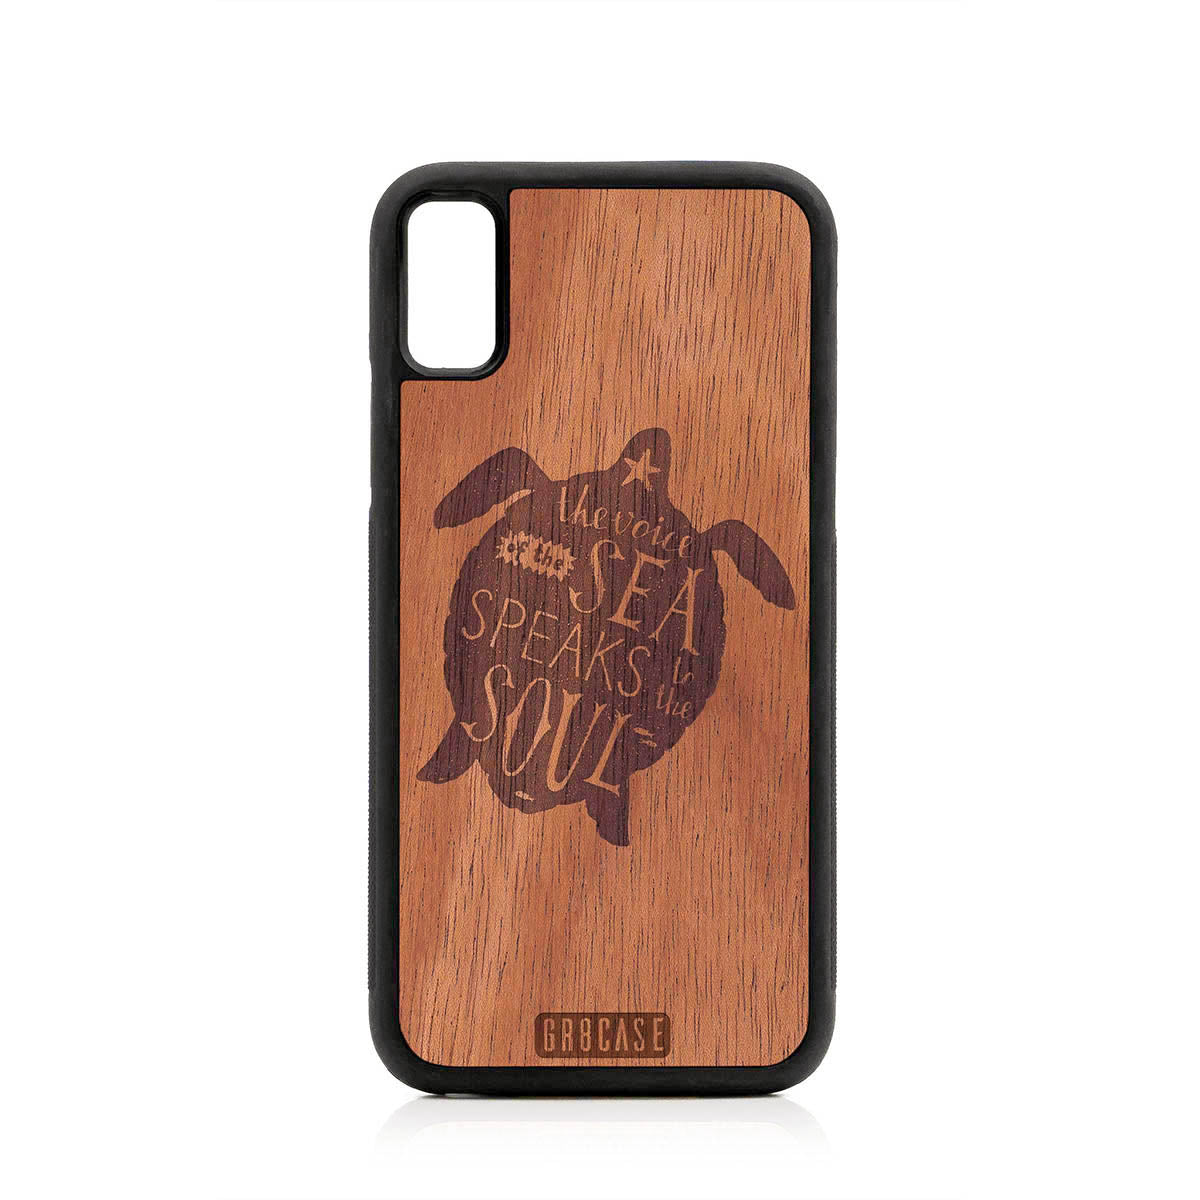 The Voice Of The Sea Speaks To The Soul (Turtle) Design Wood Case For iPhone XR